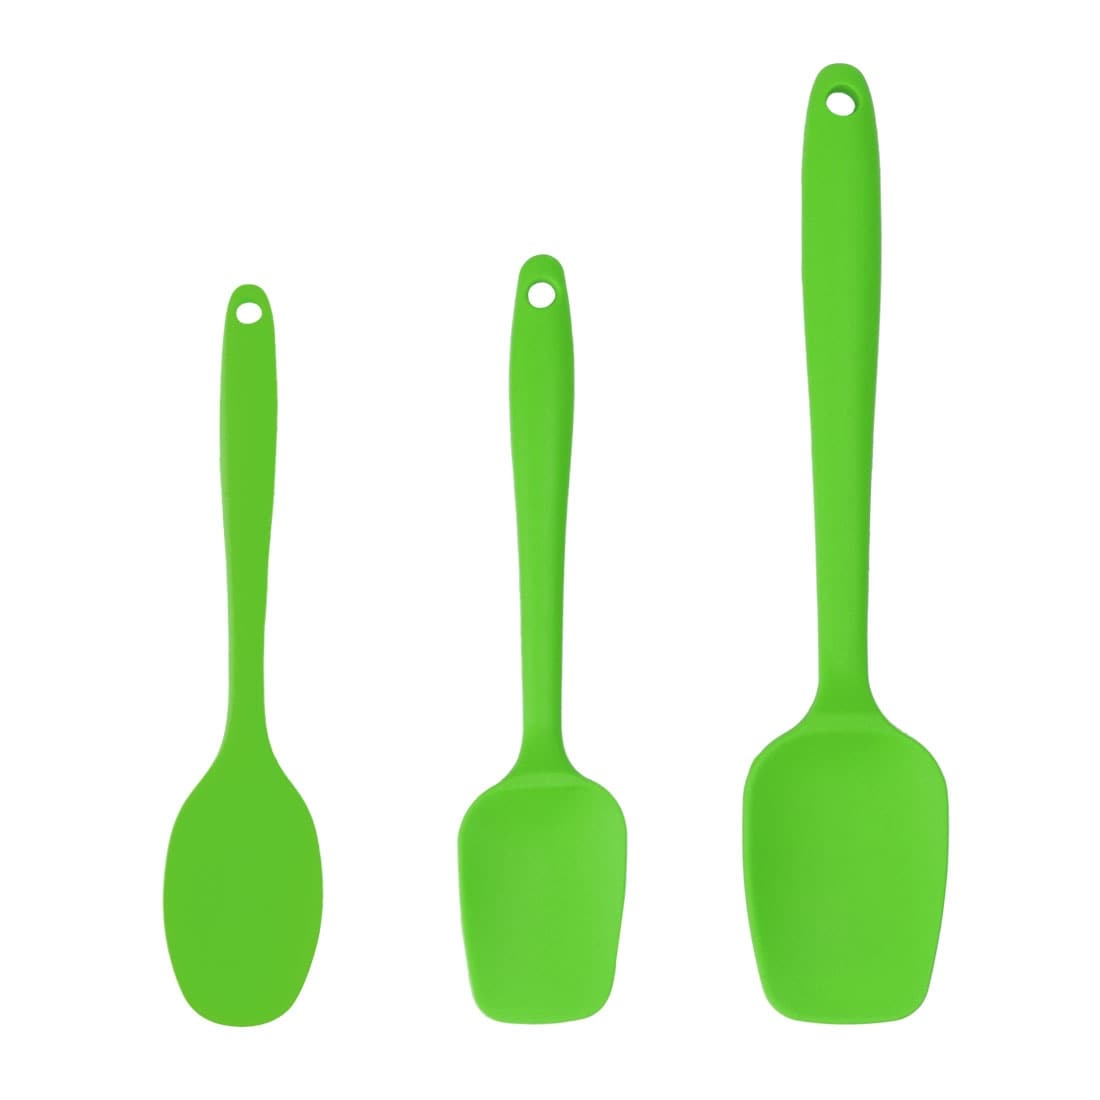 Visland 3 Piece Silicone Spatula Set, High Heat Resistant, Seamless Flexible Rubber Kitchen Cooking Mixing Baking Scraper for Cooking, Baking, and